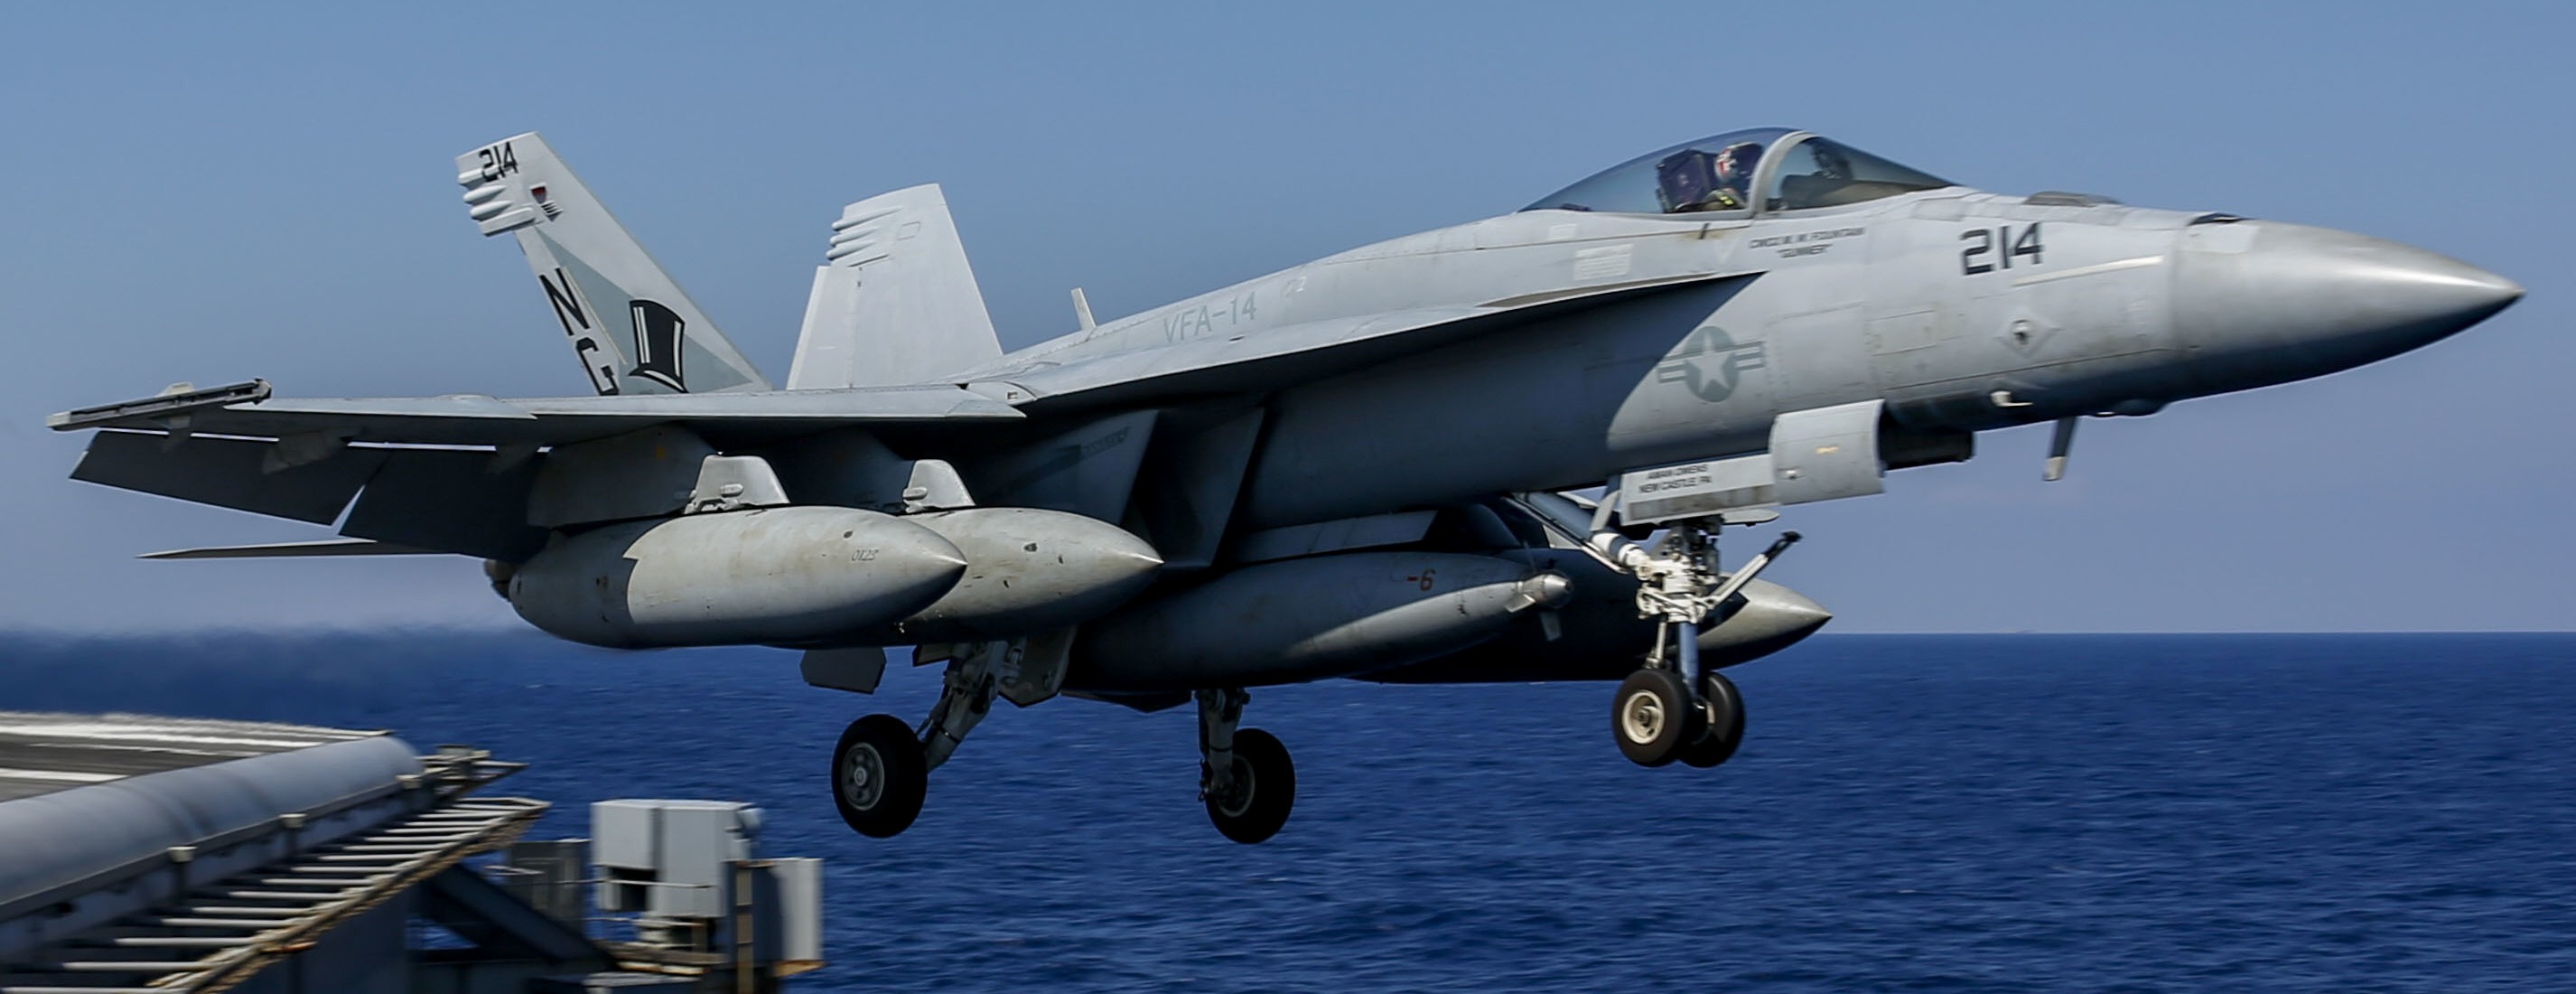 vfa-14 tophatters strike fighter squadron f/a-18e super hornet cvn-72 uss abraham lincoln cvw-9 us navy 61